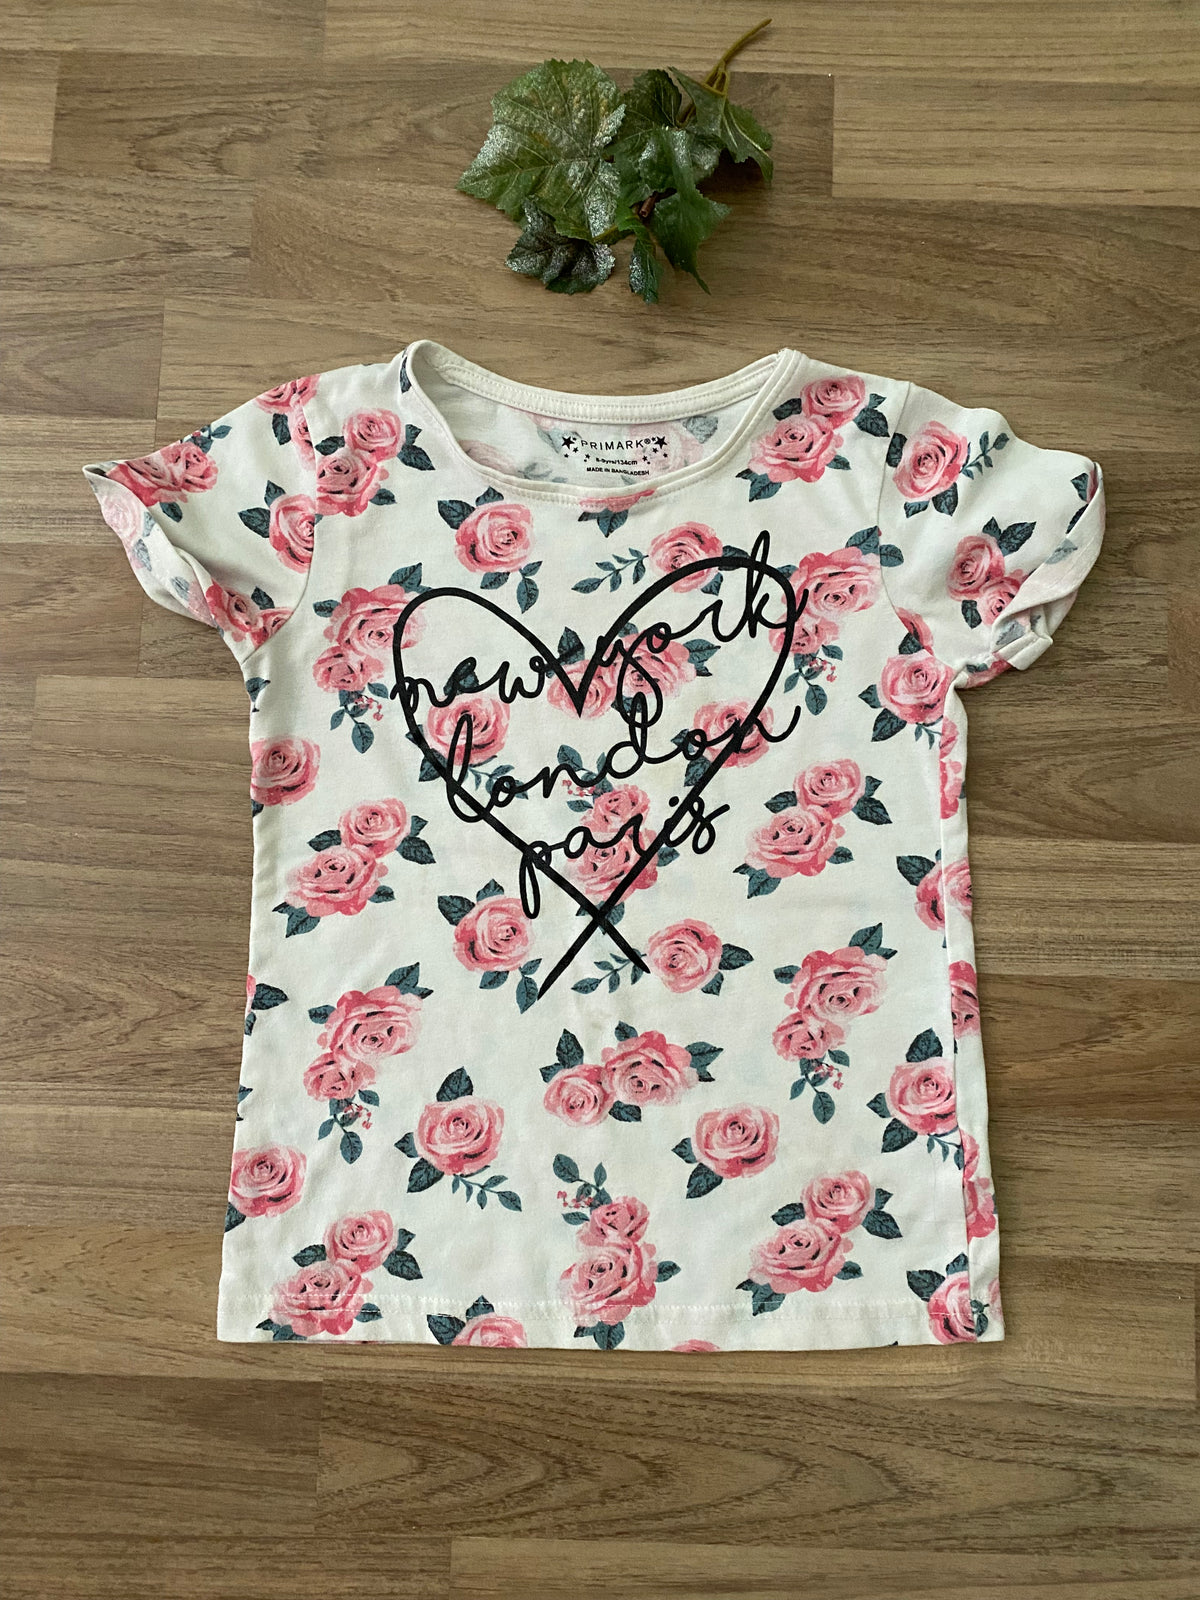 Short Sleeve Graphic Top (Girls Size 8-9)